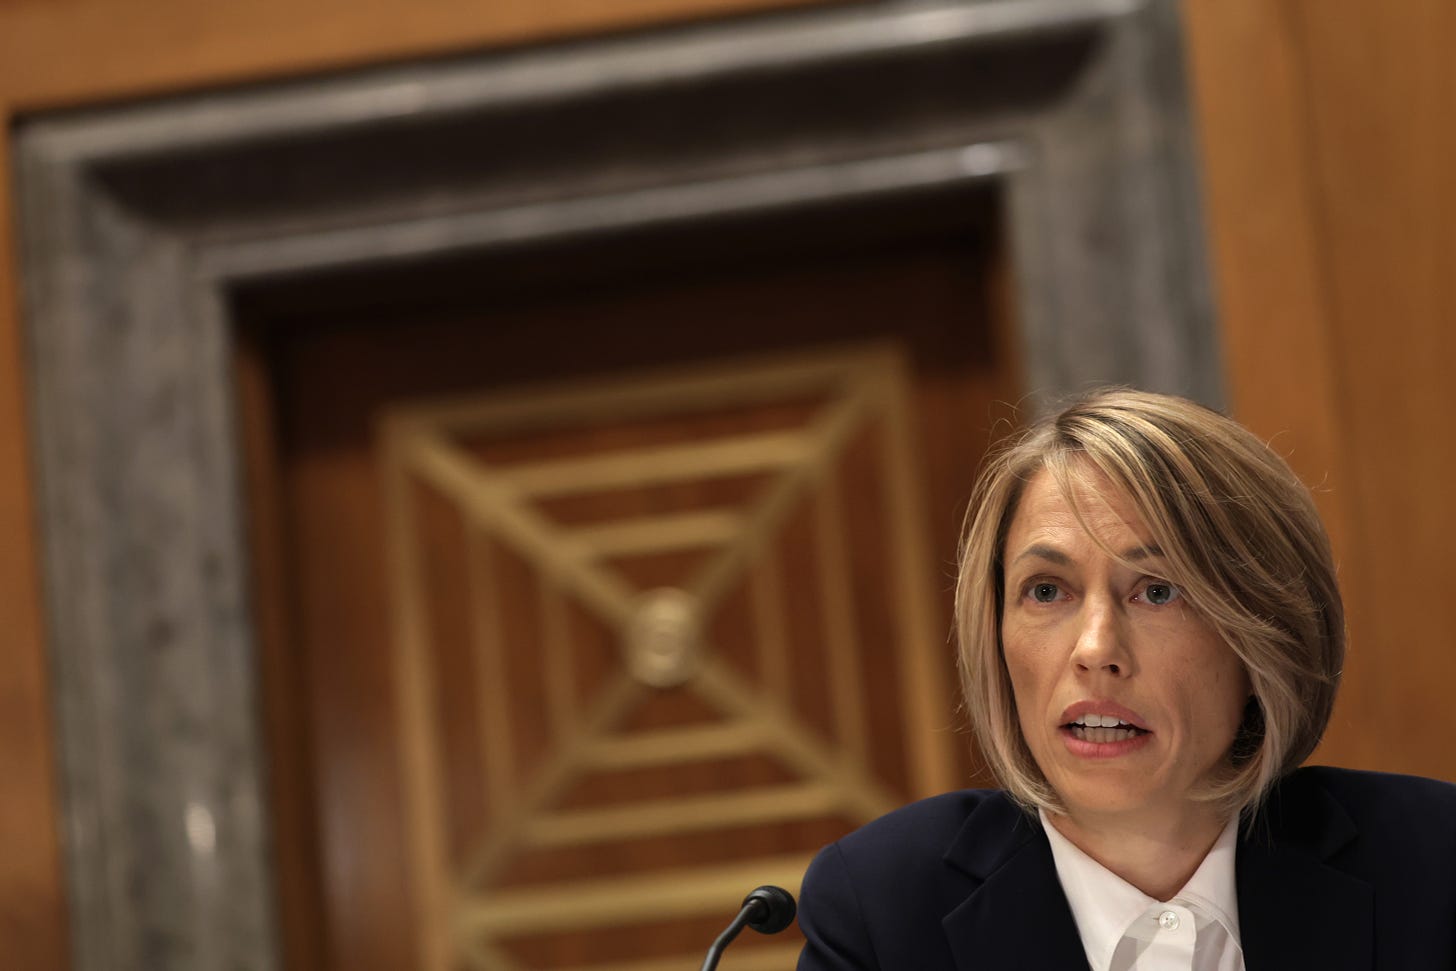 TikTok COO Vanessa Pappas testifies during a hearing before the Senate Homeland Security and Governmental Affairs Committee today in Washington, DC. (Alex Wong / Getty Images)